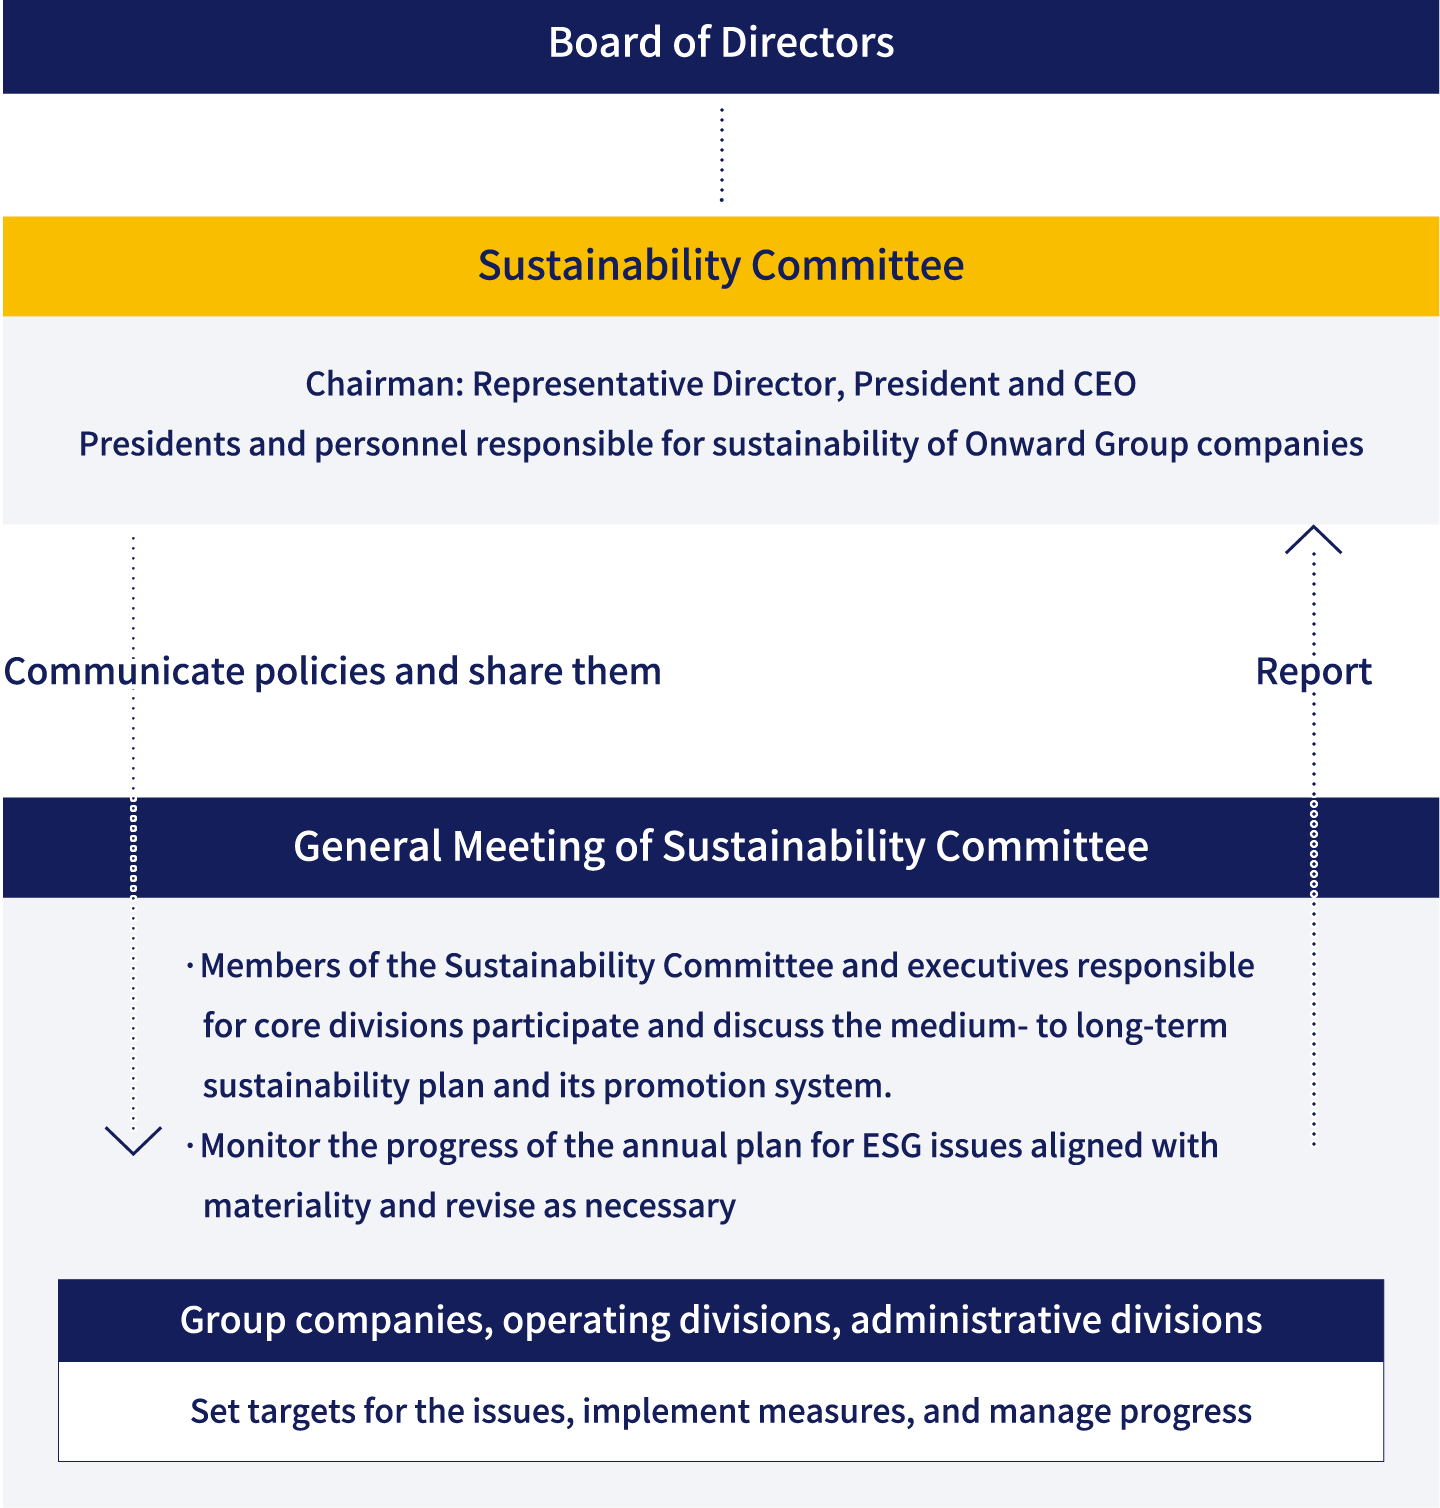 The Onward Group Sustainability Committee Organizational Structure